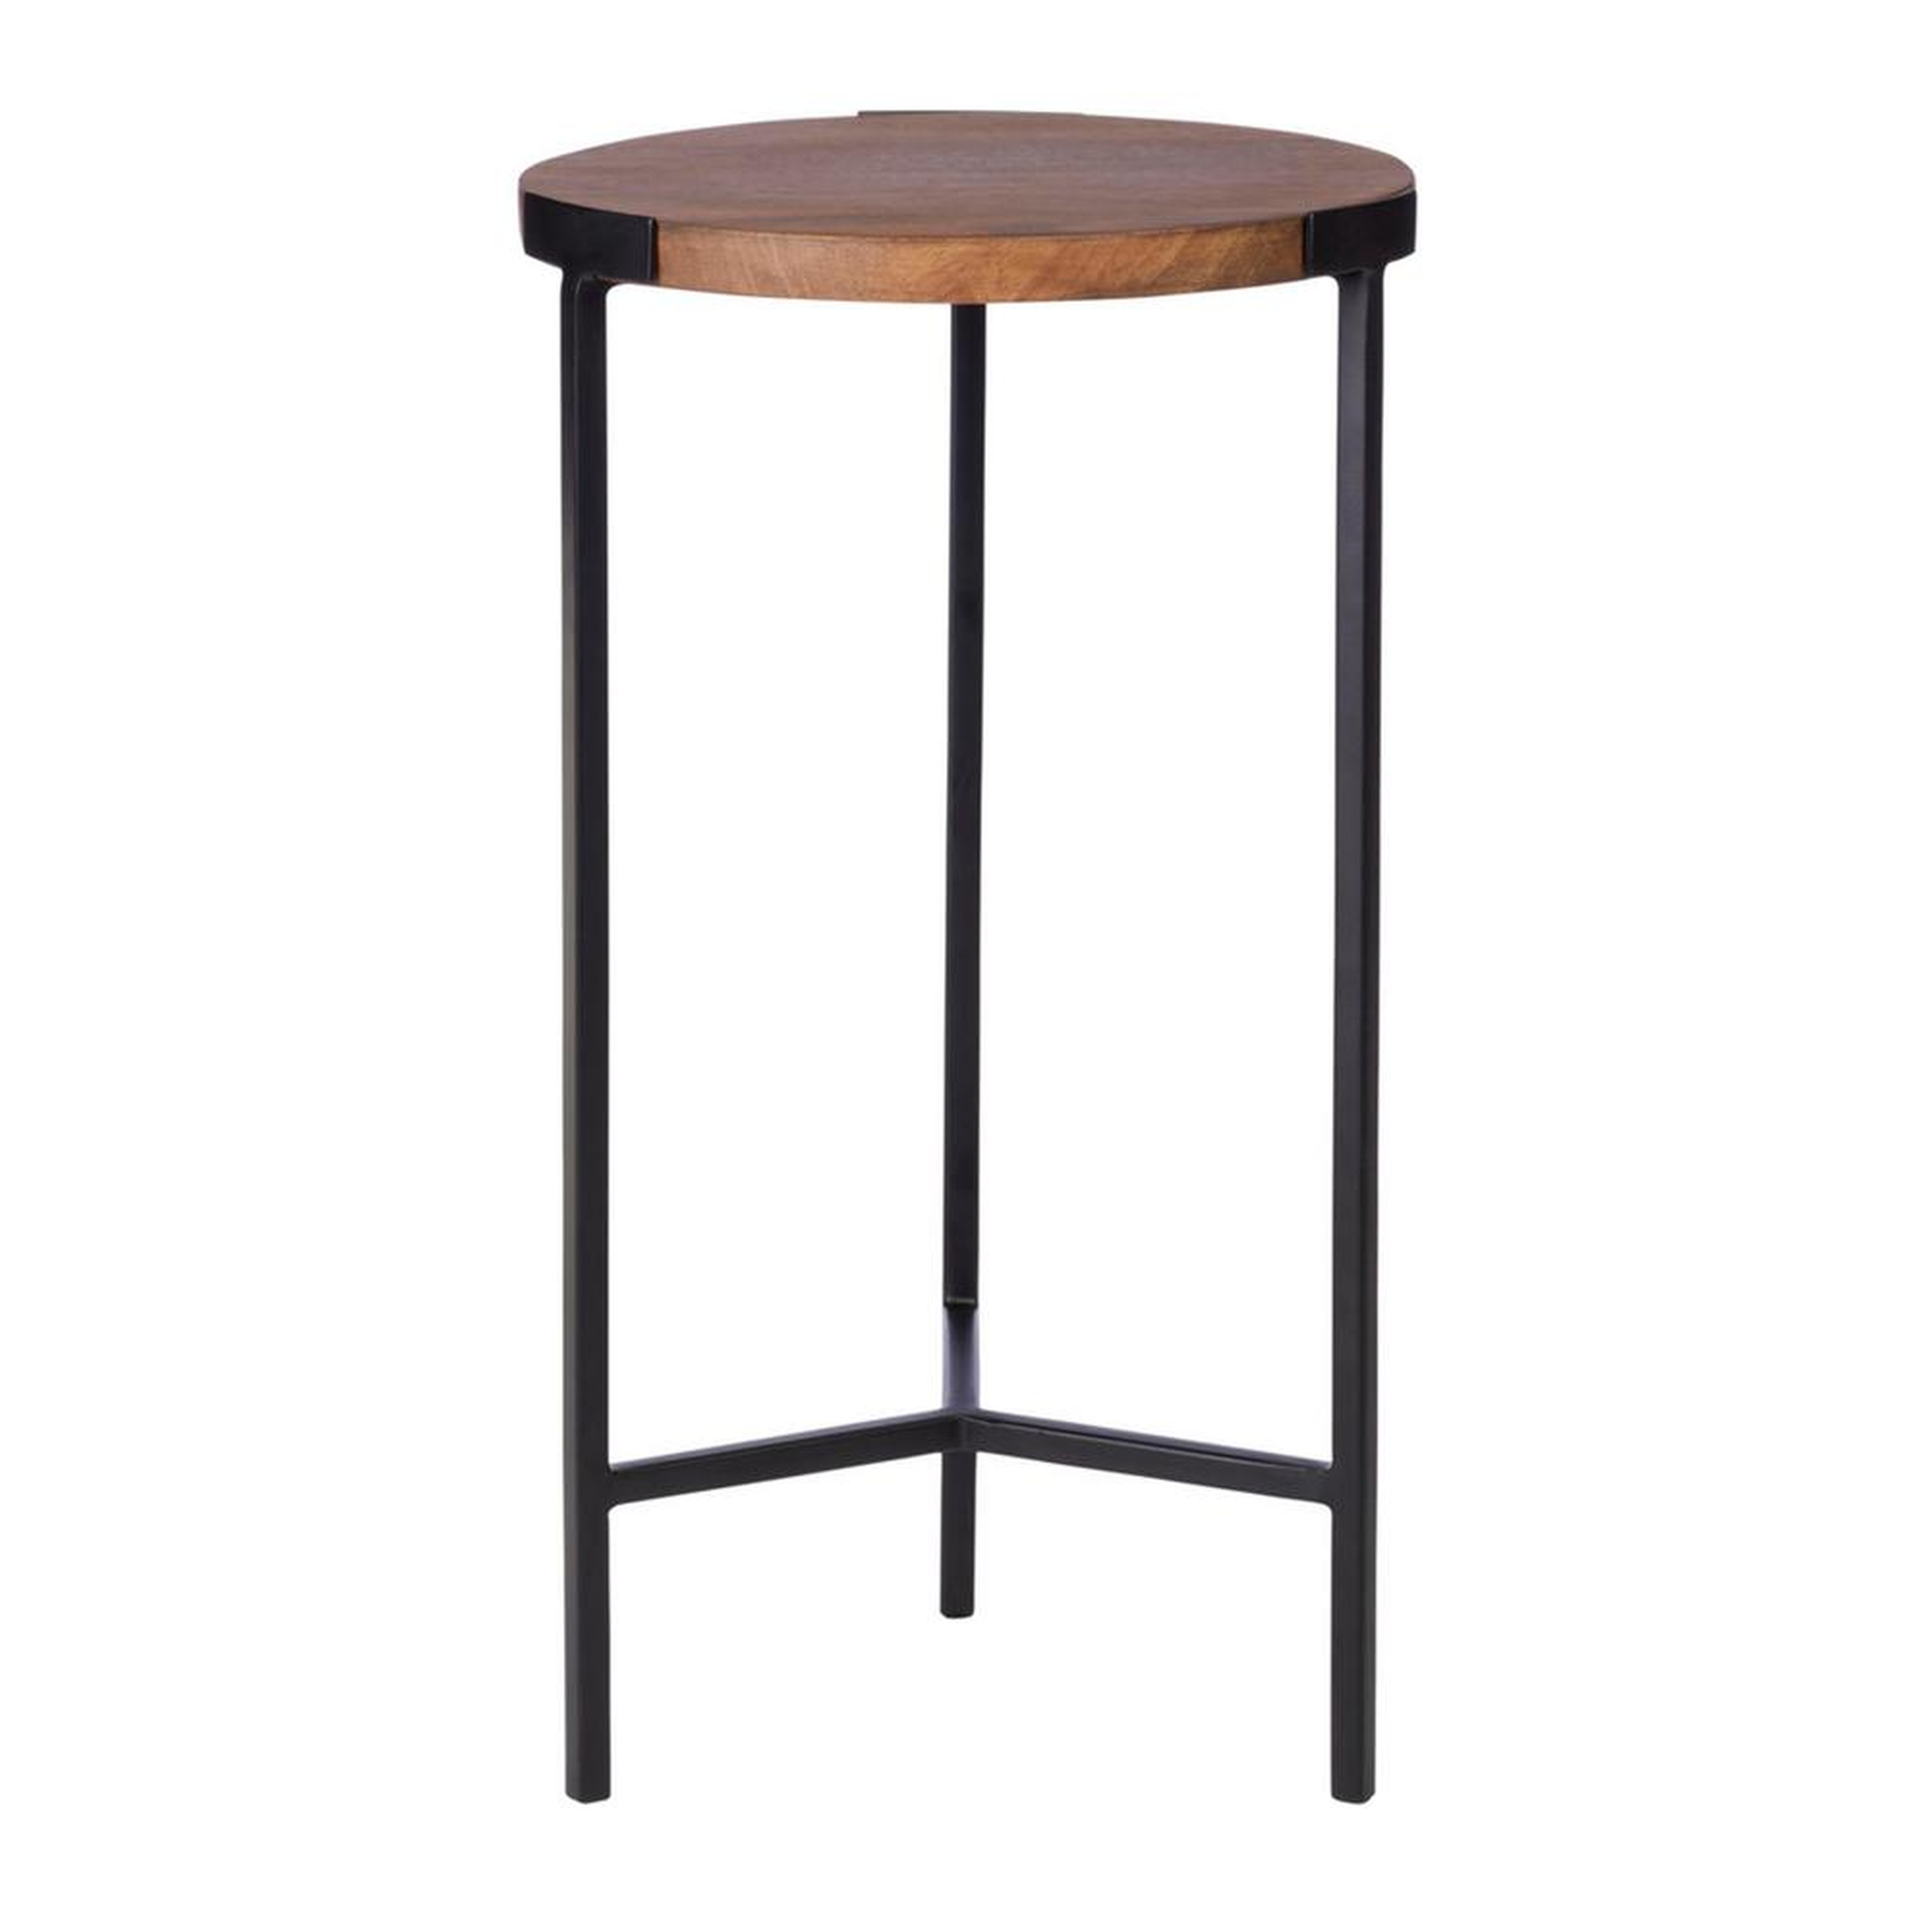 StyleWell Round Black Finish Metal End Table with Haze Finish Wood Top (12 in. W x 21.5 in. H), Haze/Black - Home Depot